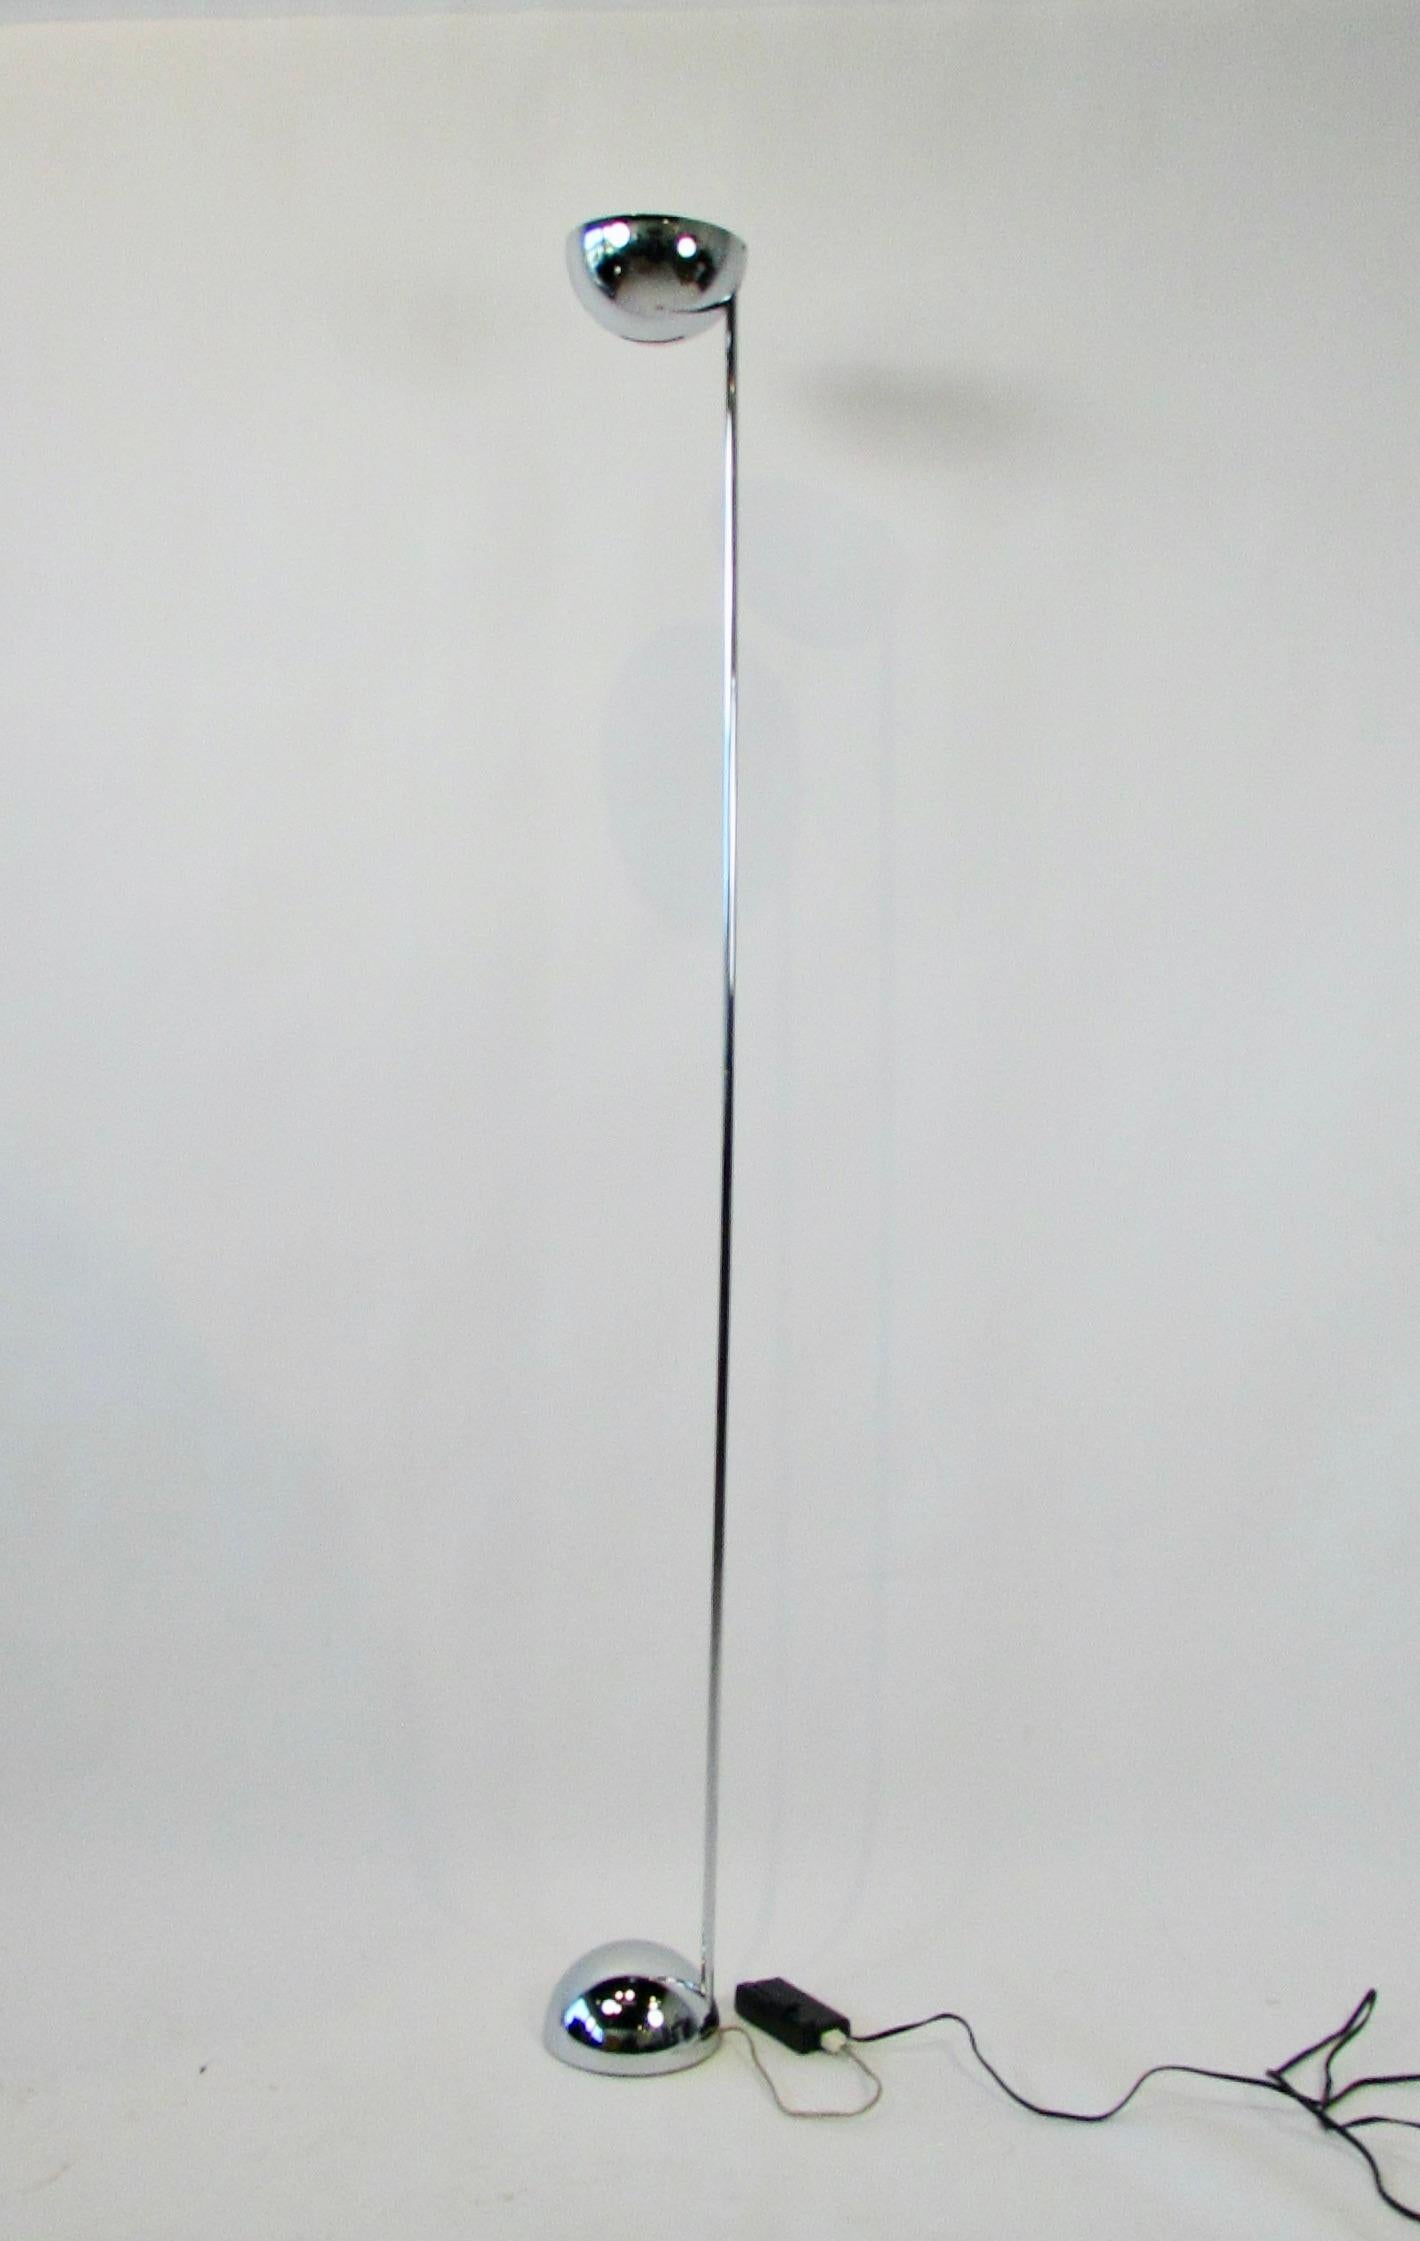 Pair of post modern torchiere floor lamps by George Kovacs in a polished chrome metal finish. lamp Exposed half-sphere used as both its base and shade joined by a long thin stem. The lamp retains its original wiring. George Kovacs is one the world’s